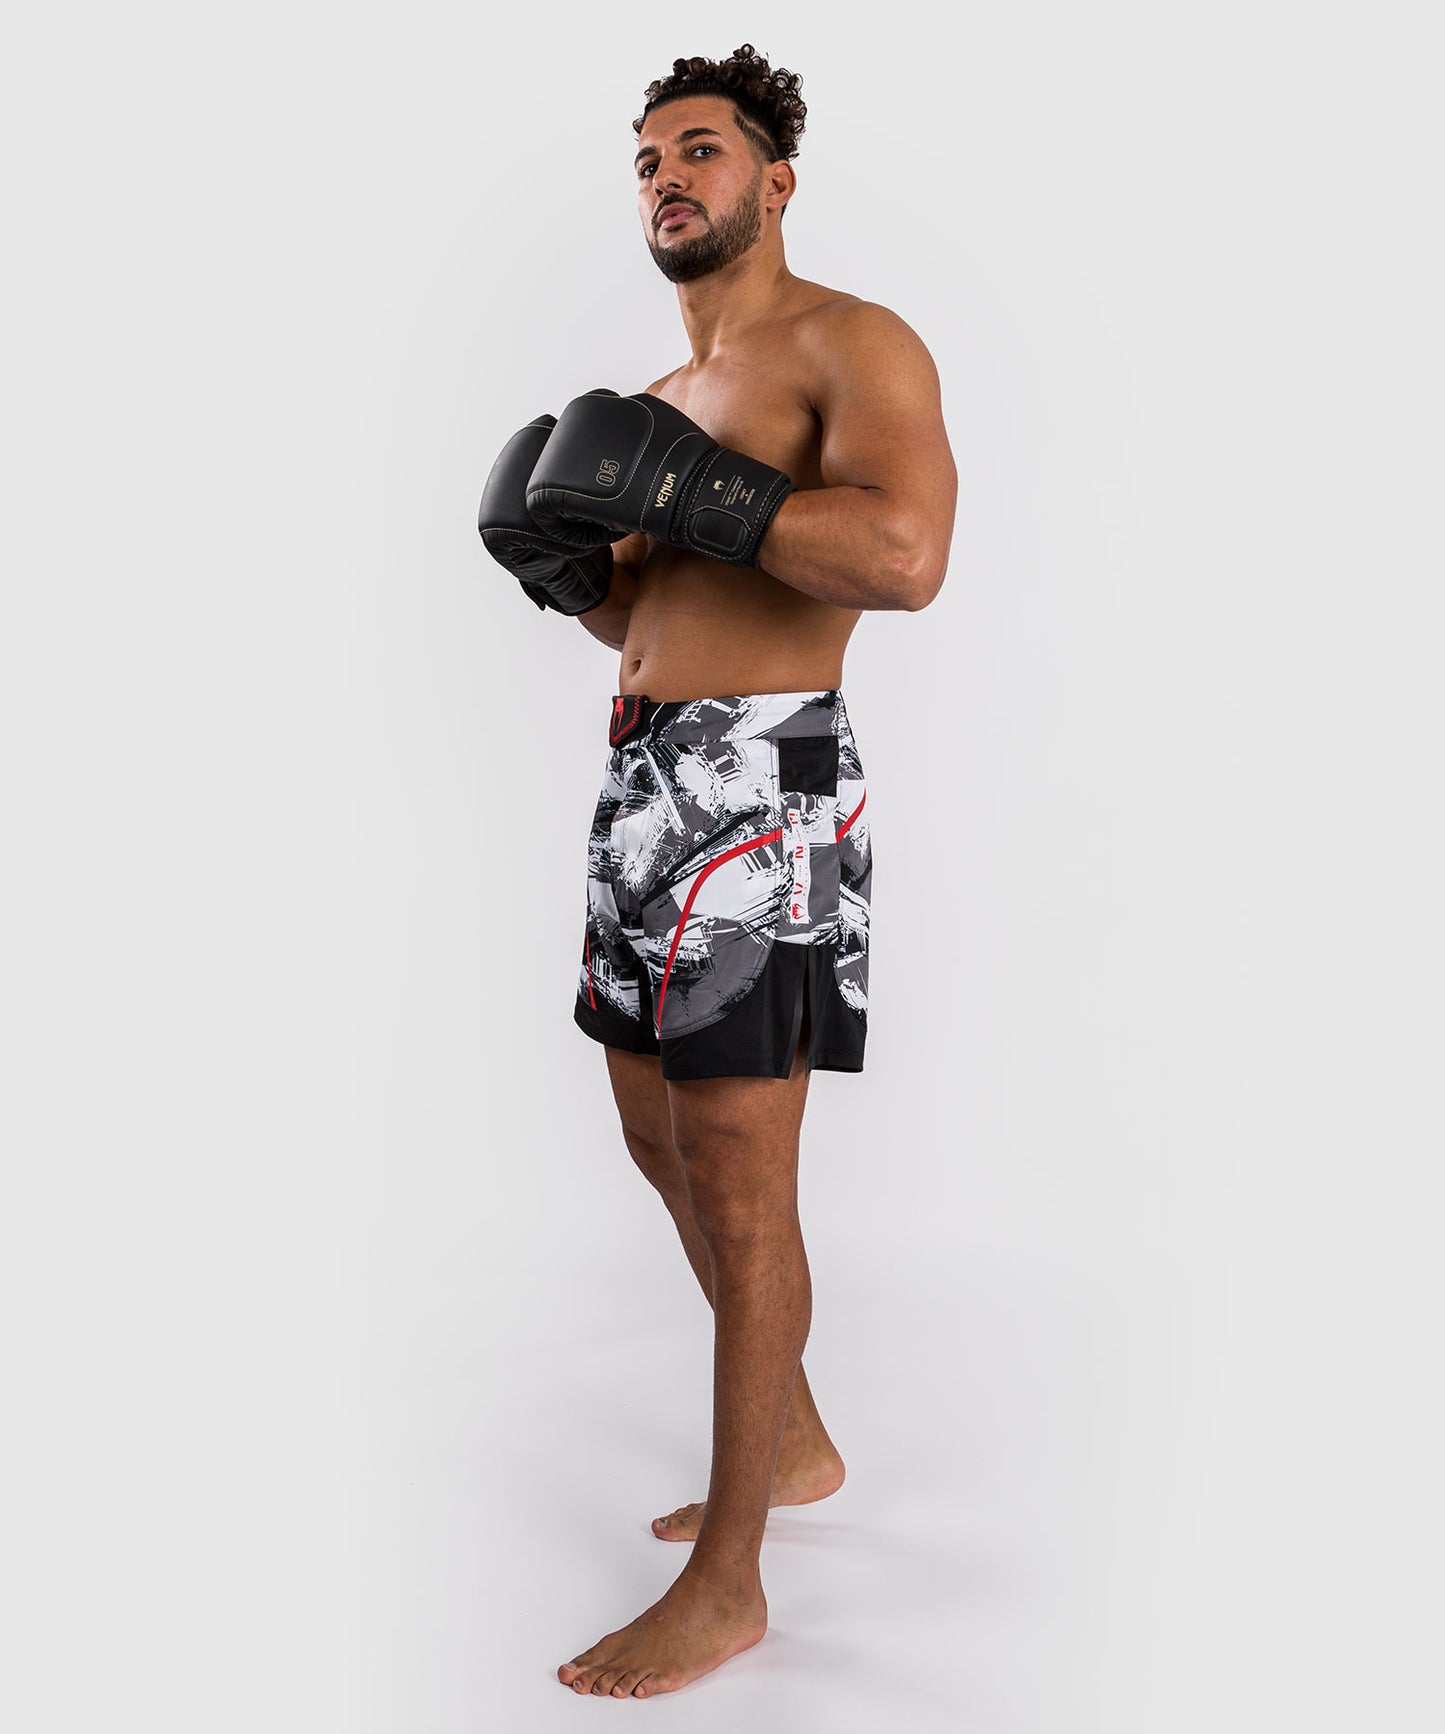 Venum Electron 3.0 Fight Shorts - Grey/Red